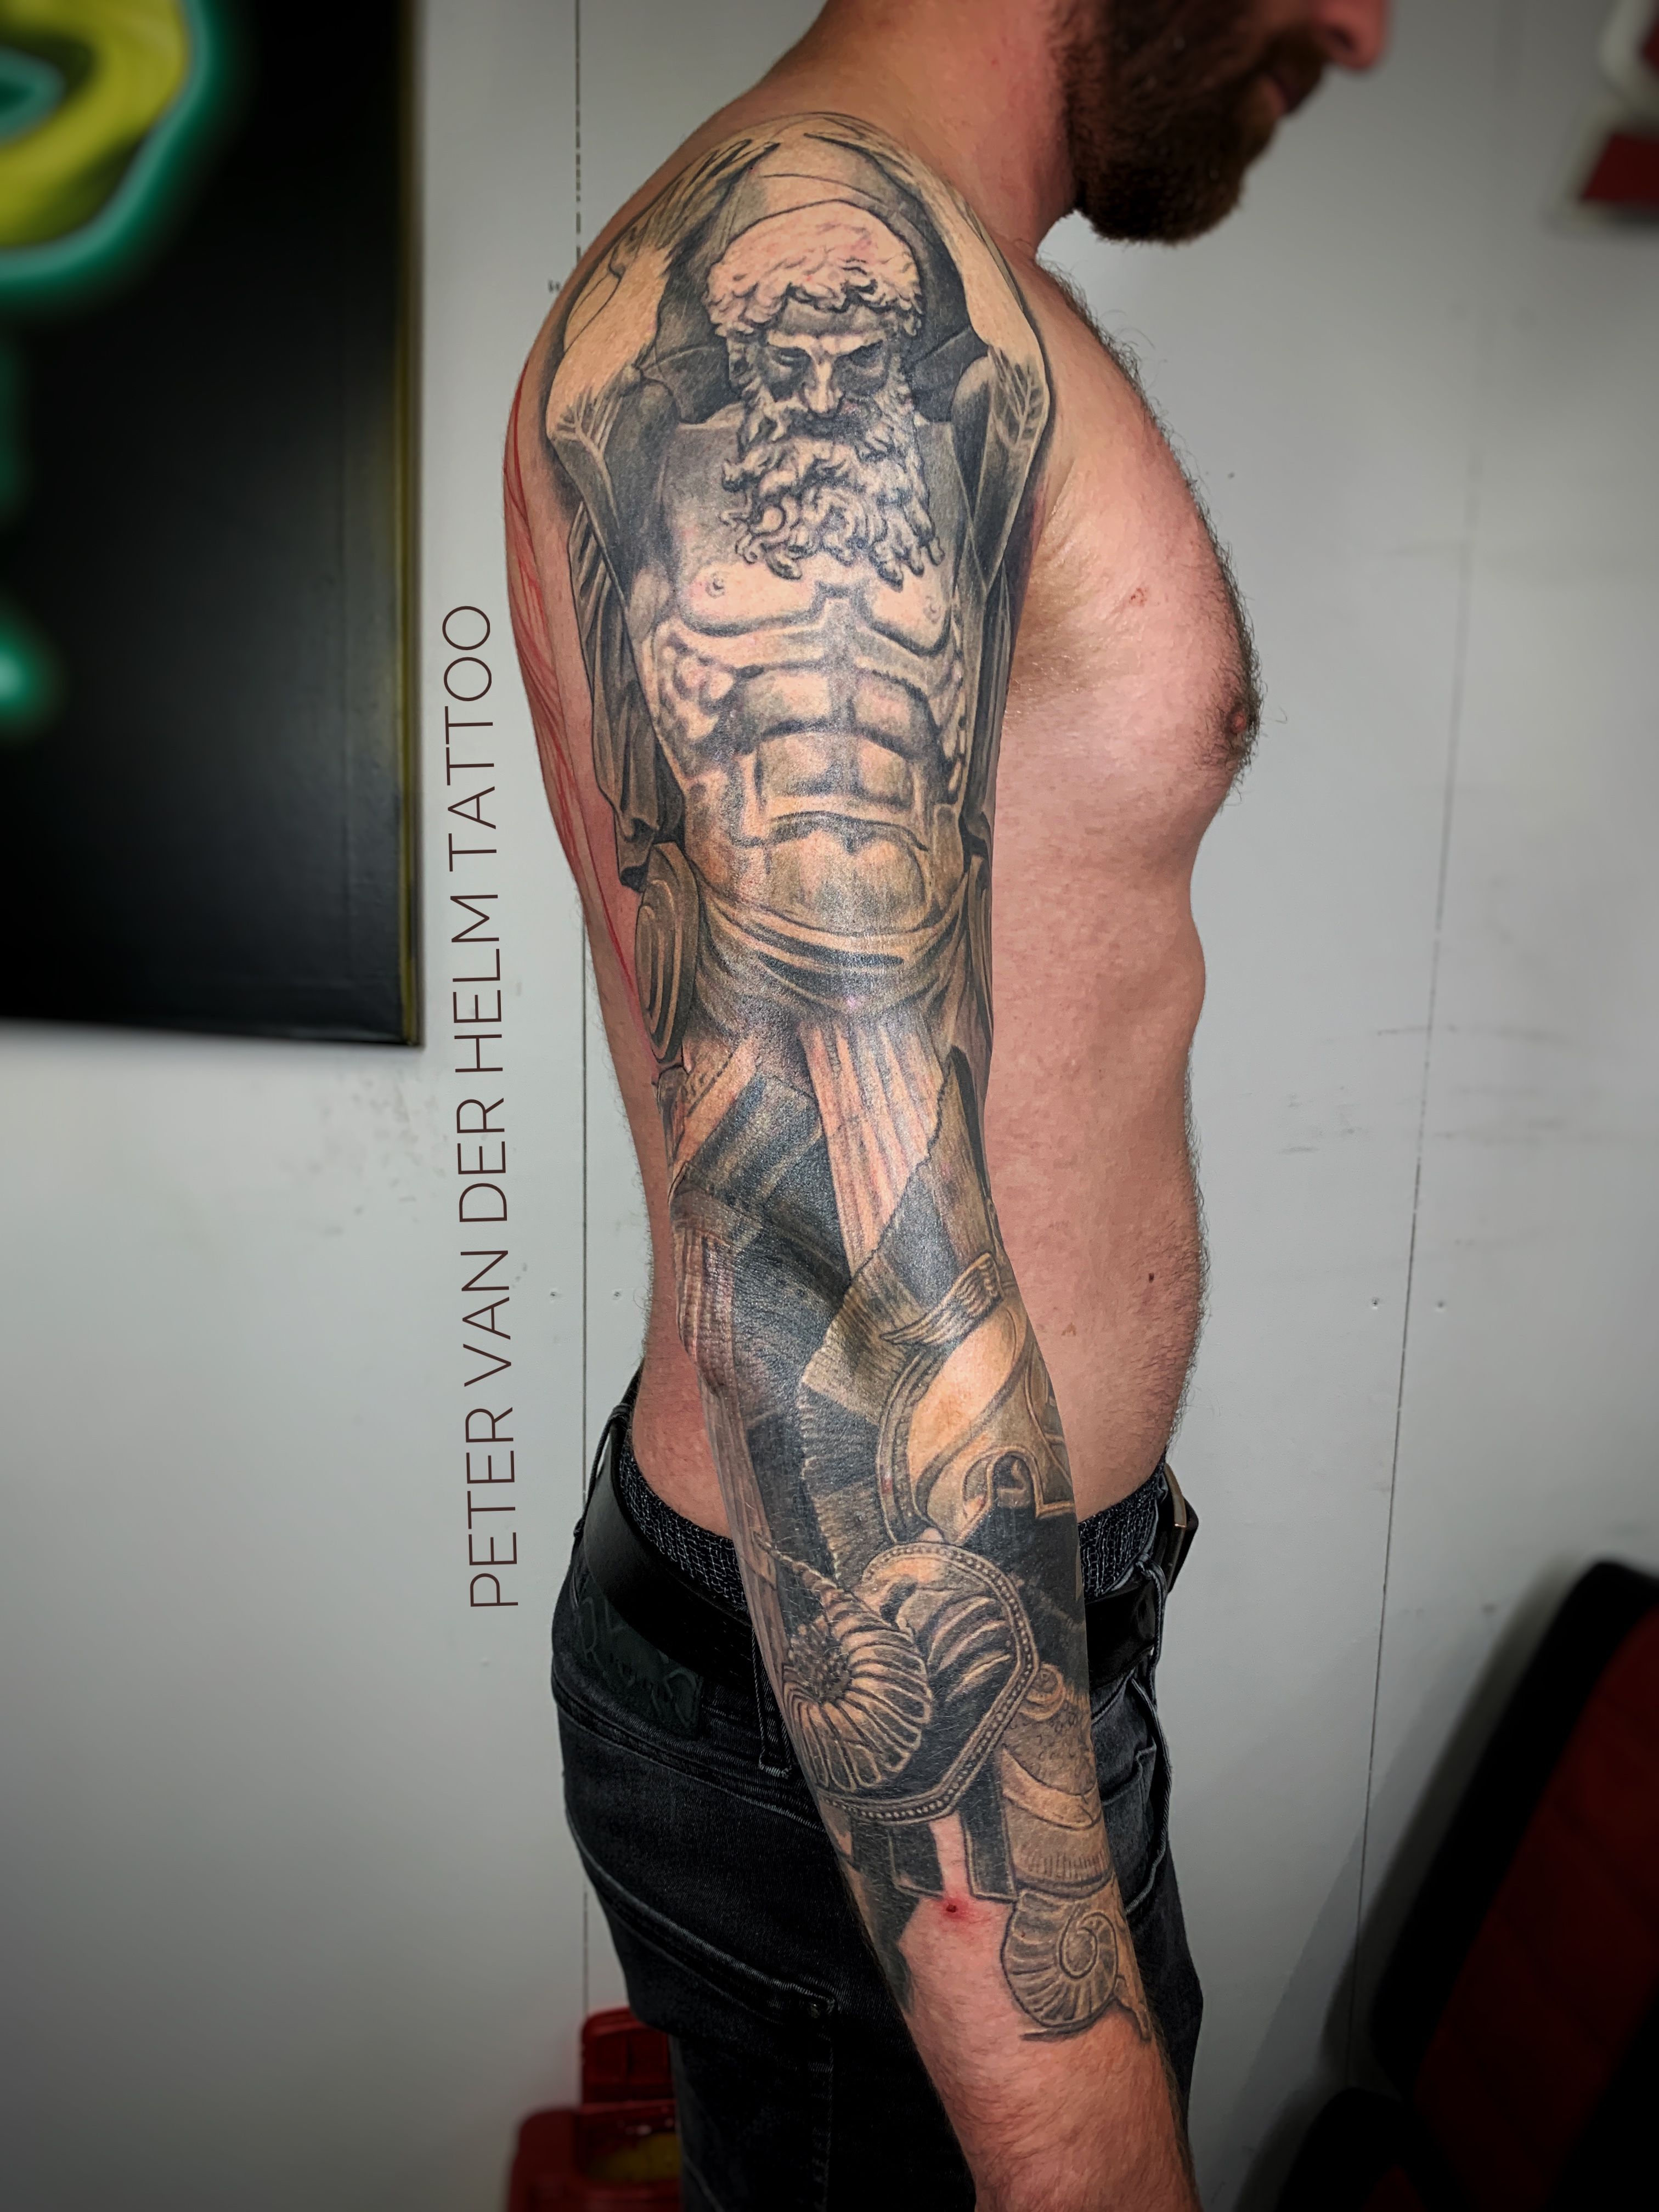 Tattoo uploaded by Peter van der Helm  Full sleeve with Falanx and Atlas  completely healed  Tattoodo